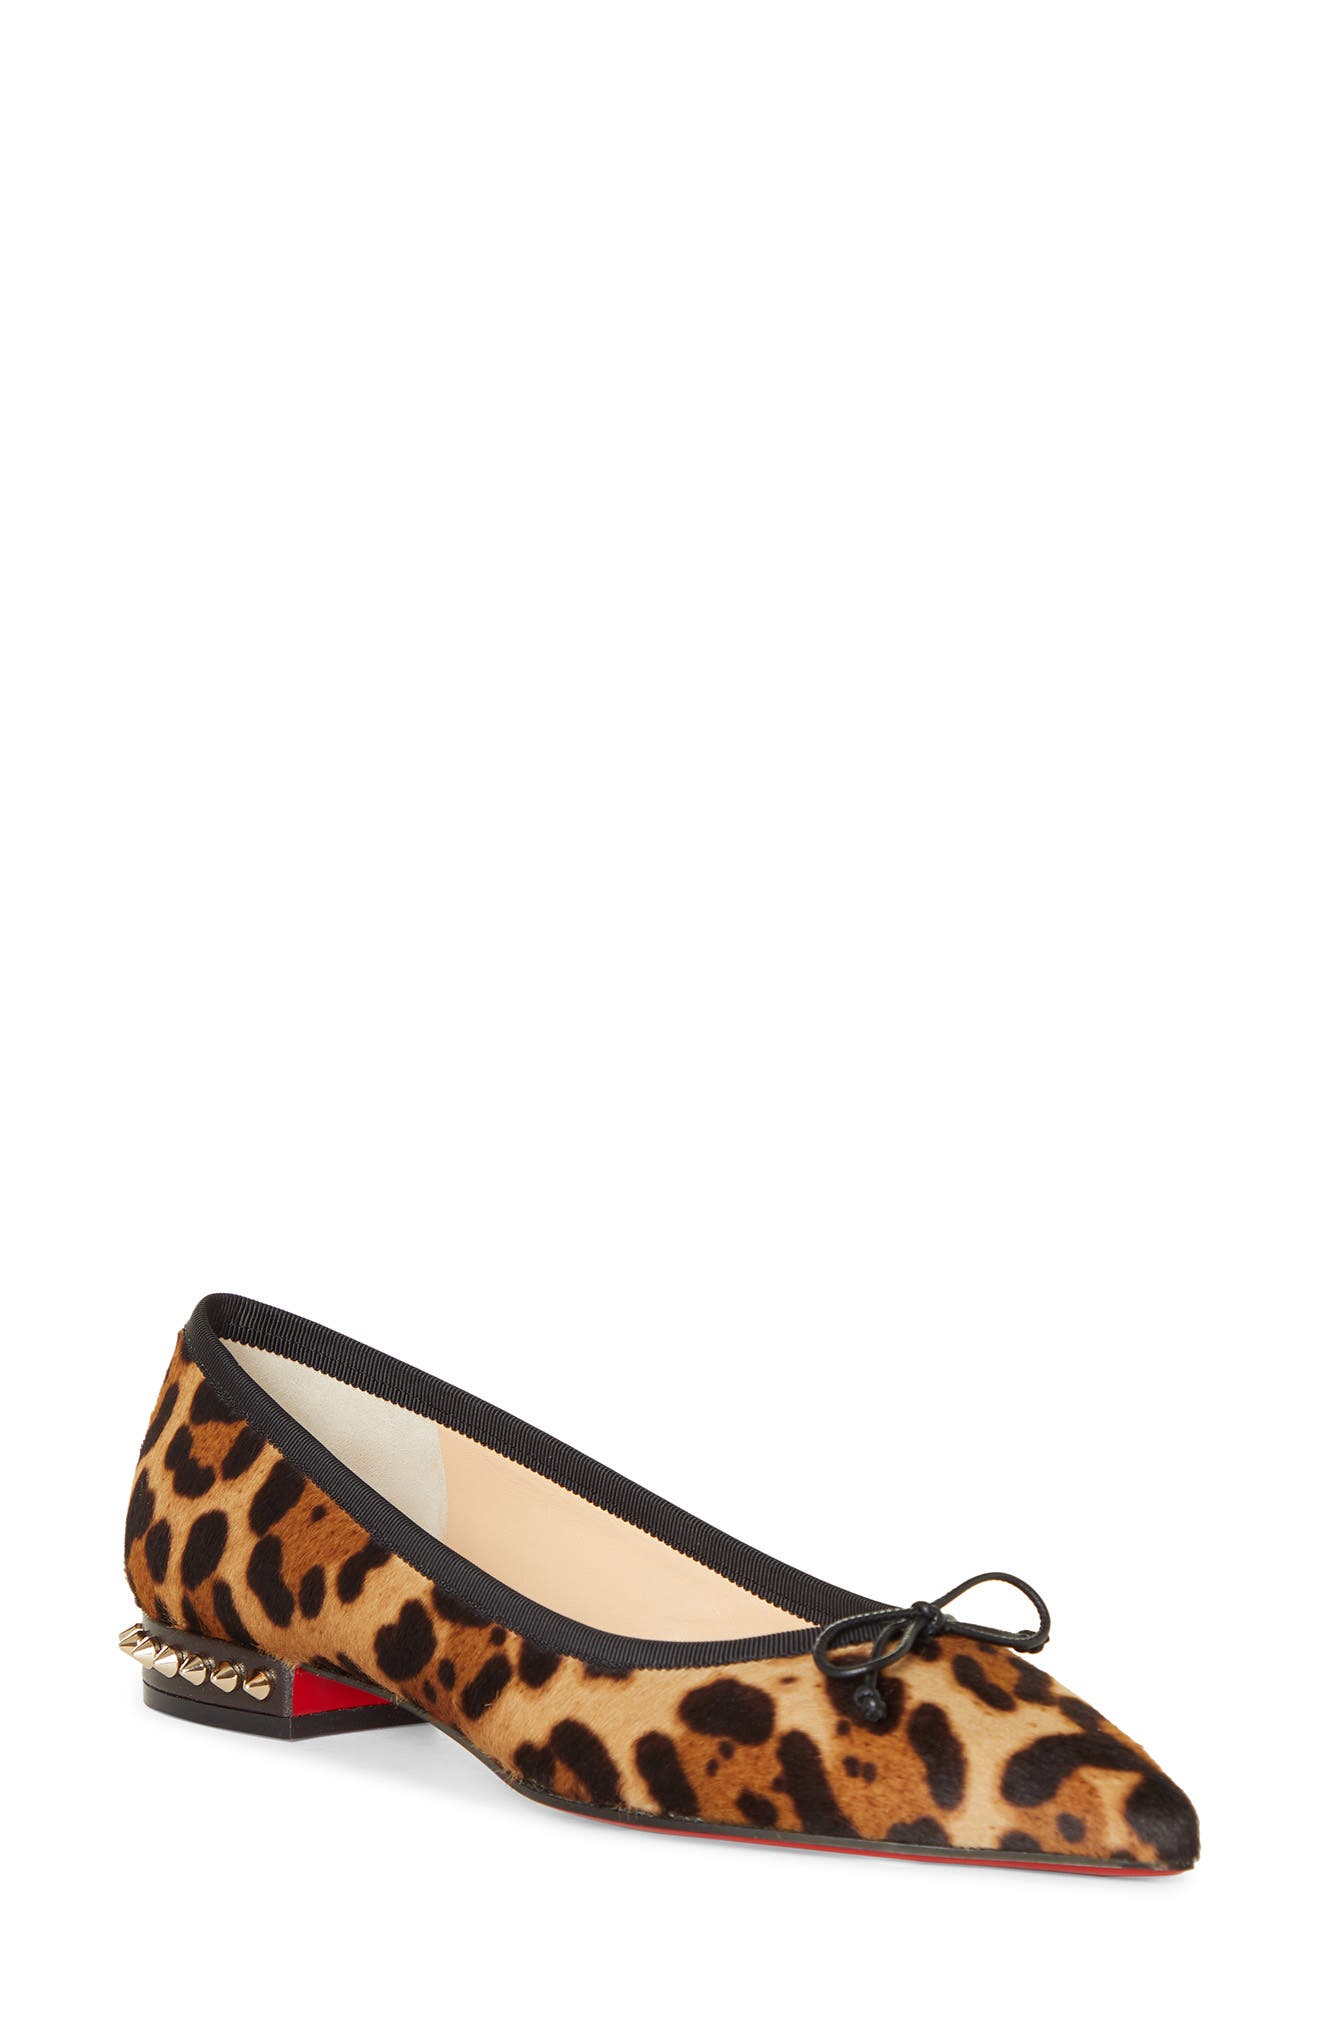 louboutin shoes nordstrom rack